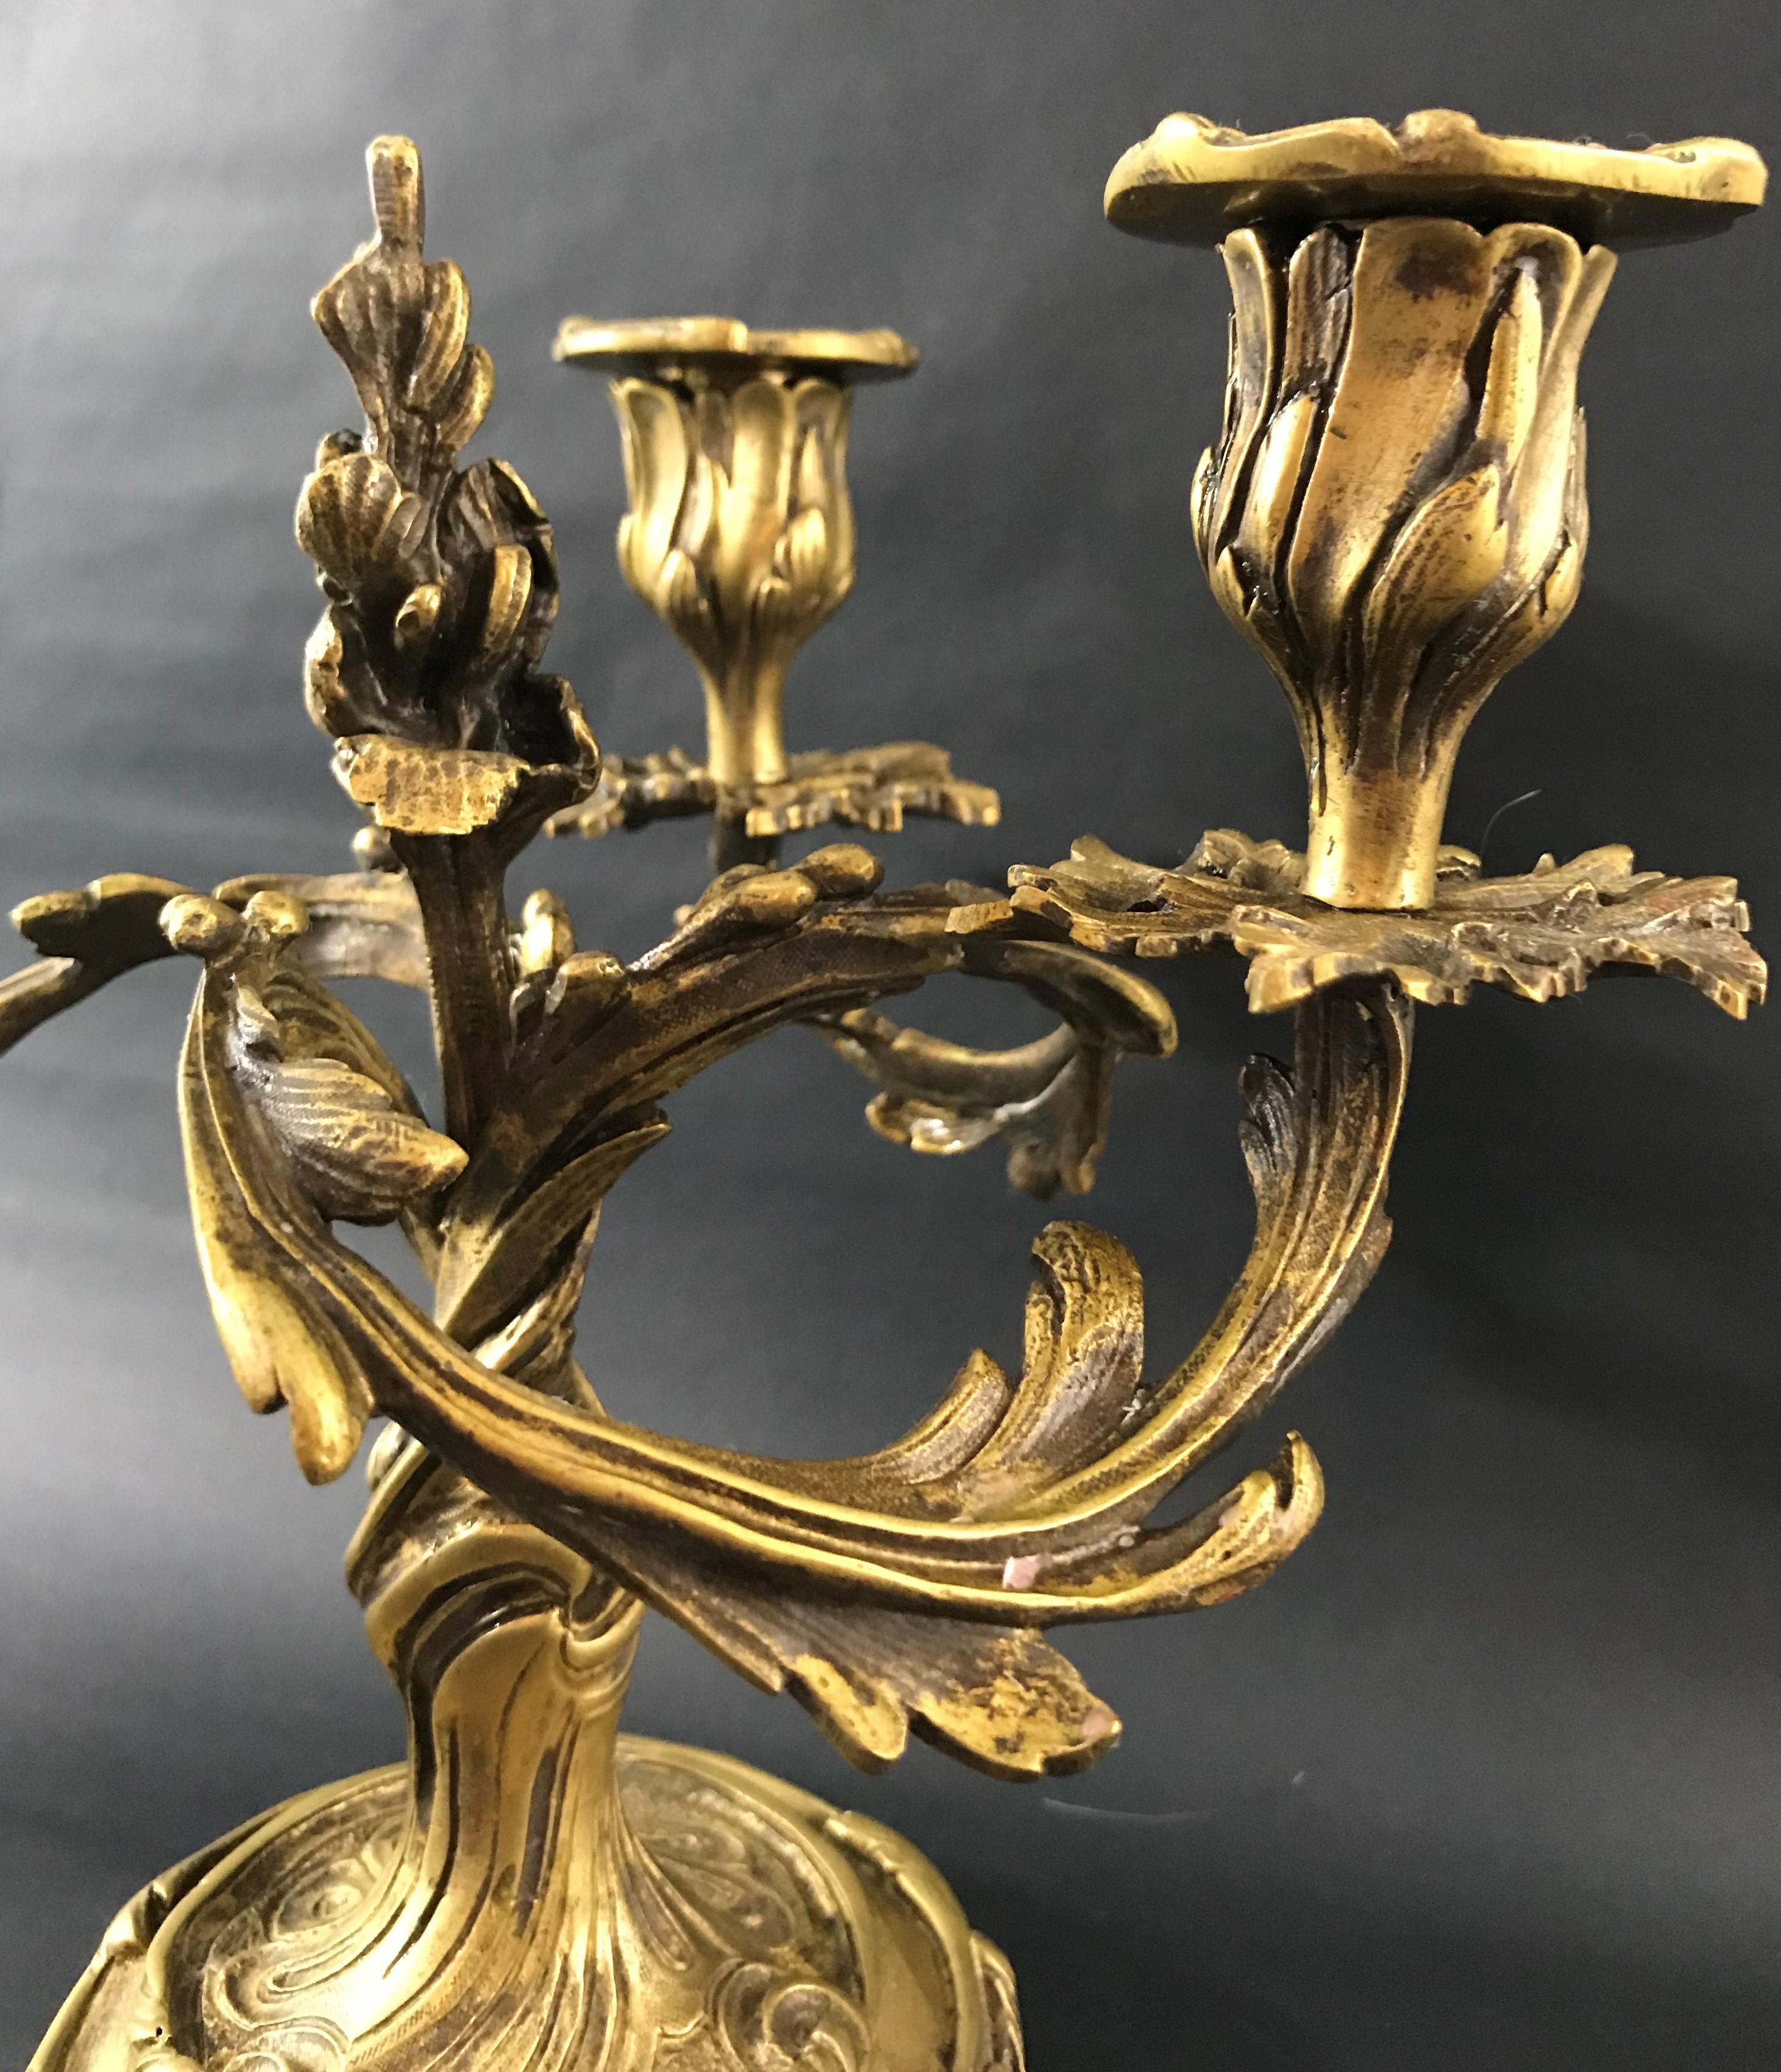 Beautiful Louis XV style candelabra with three arms of light in gilded bronze with floral decorations.
Napoleon 3 period
19th century.